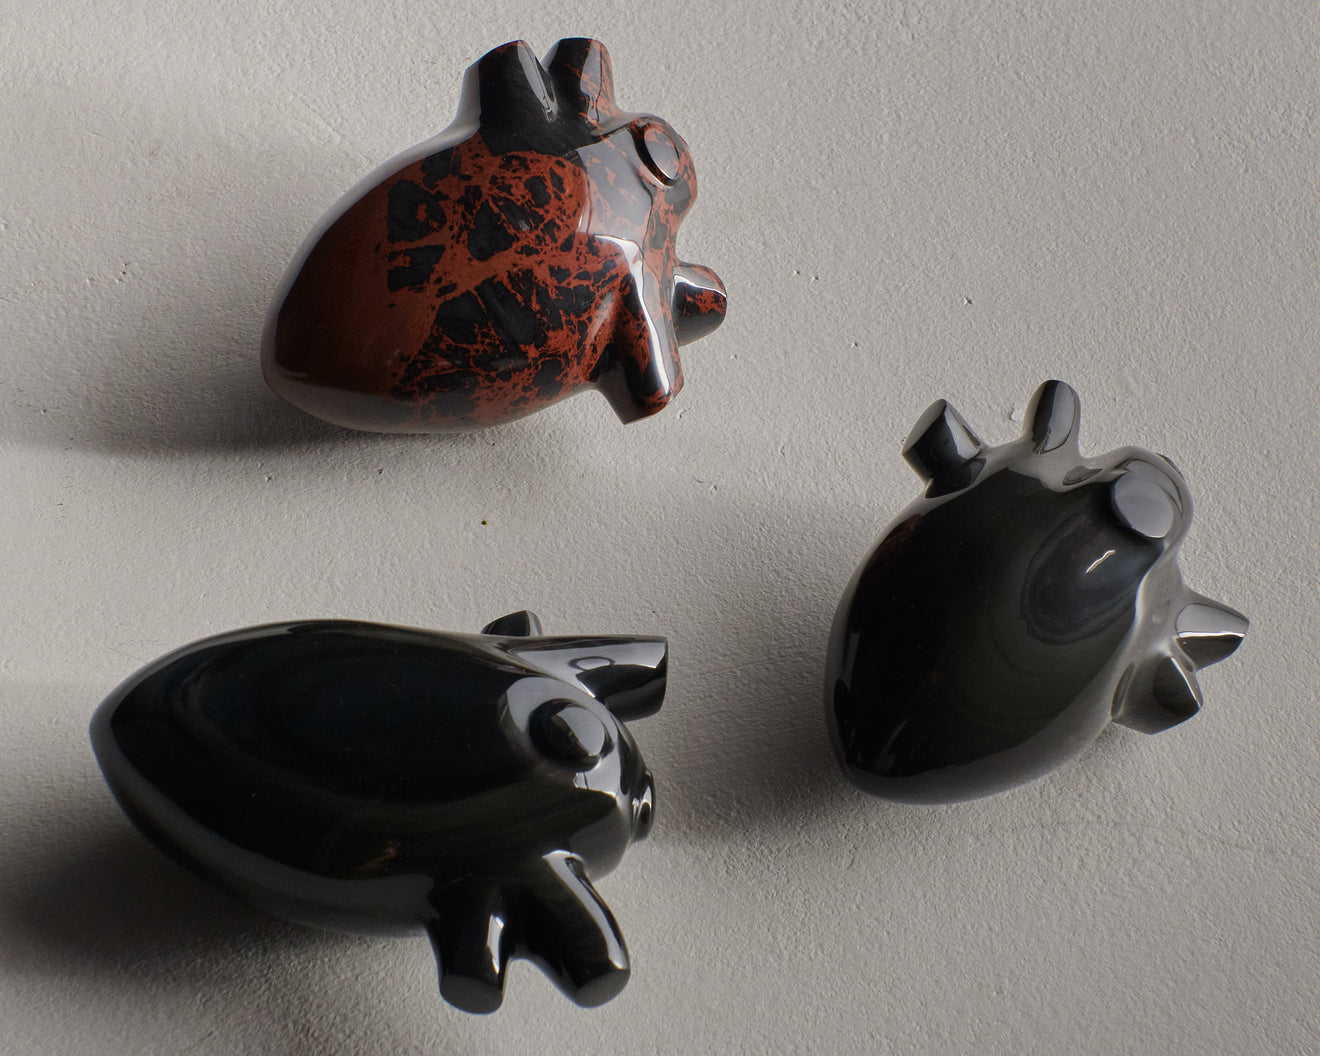 OBSIDIAN CARVED HEART(S), LARGE & SMALL